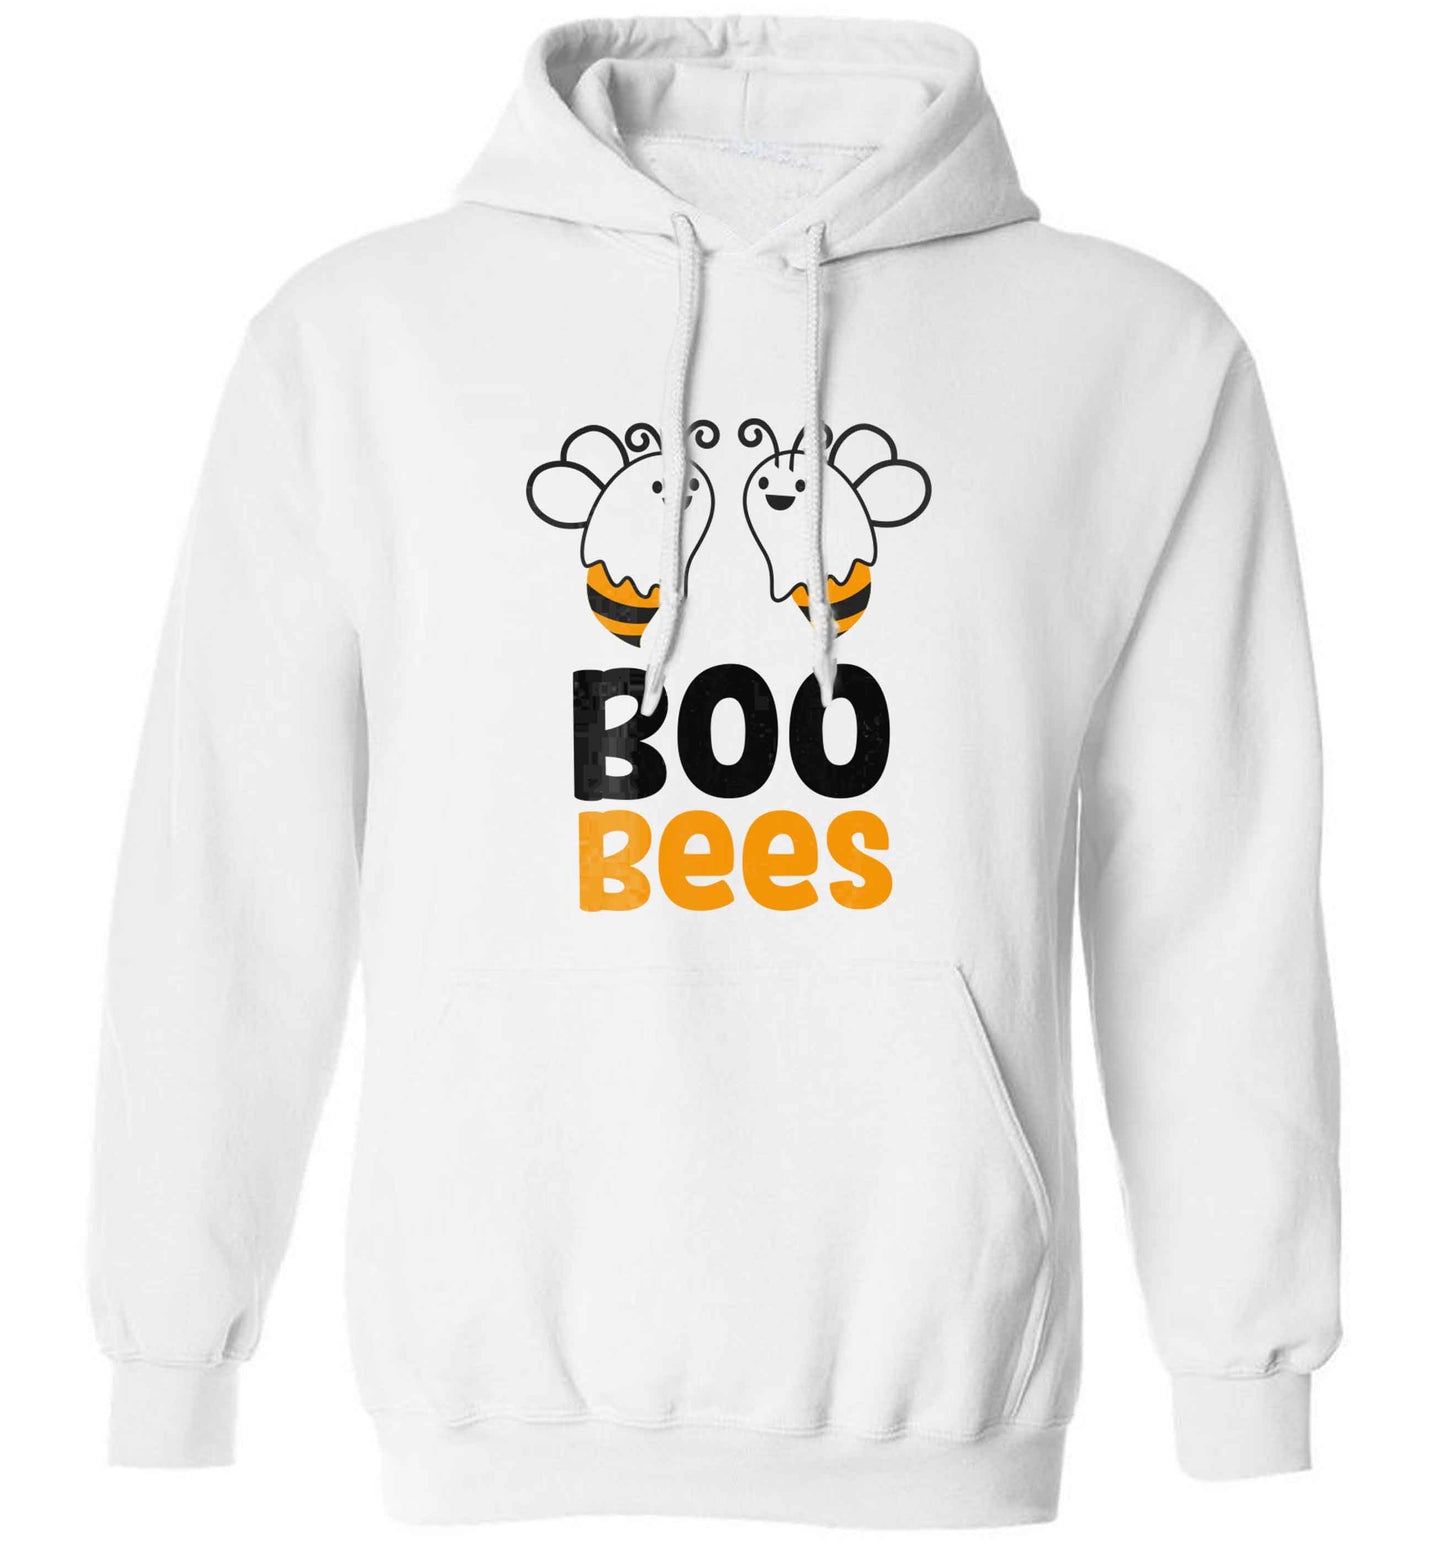 Boo bees Kit adults unisex white hoodie 2XL